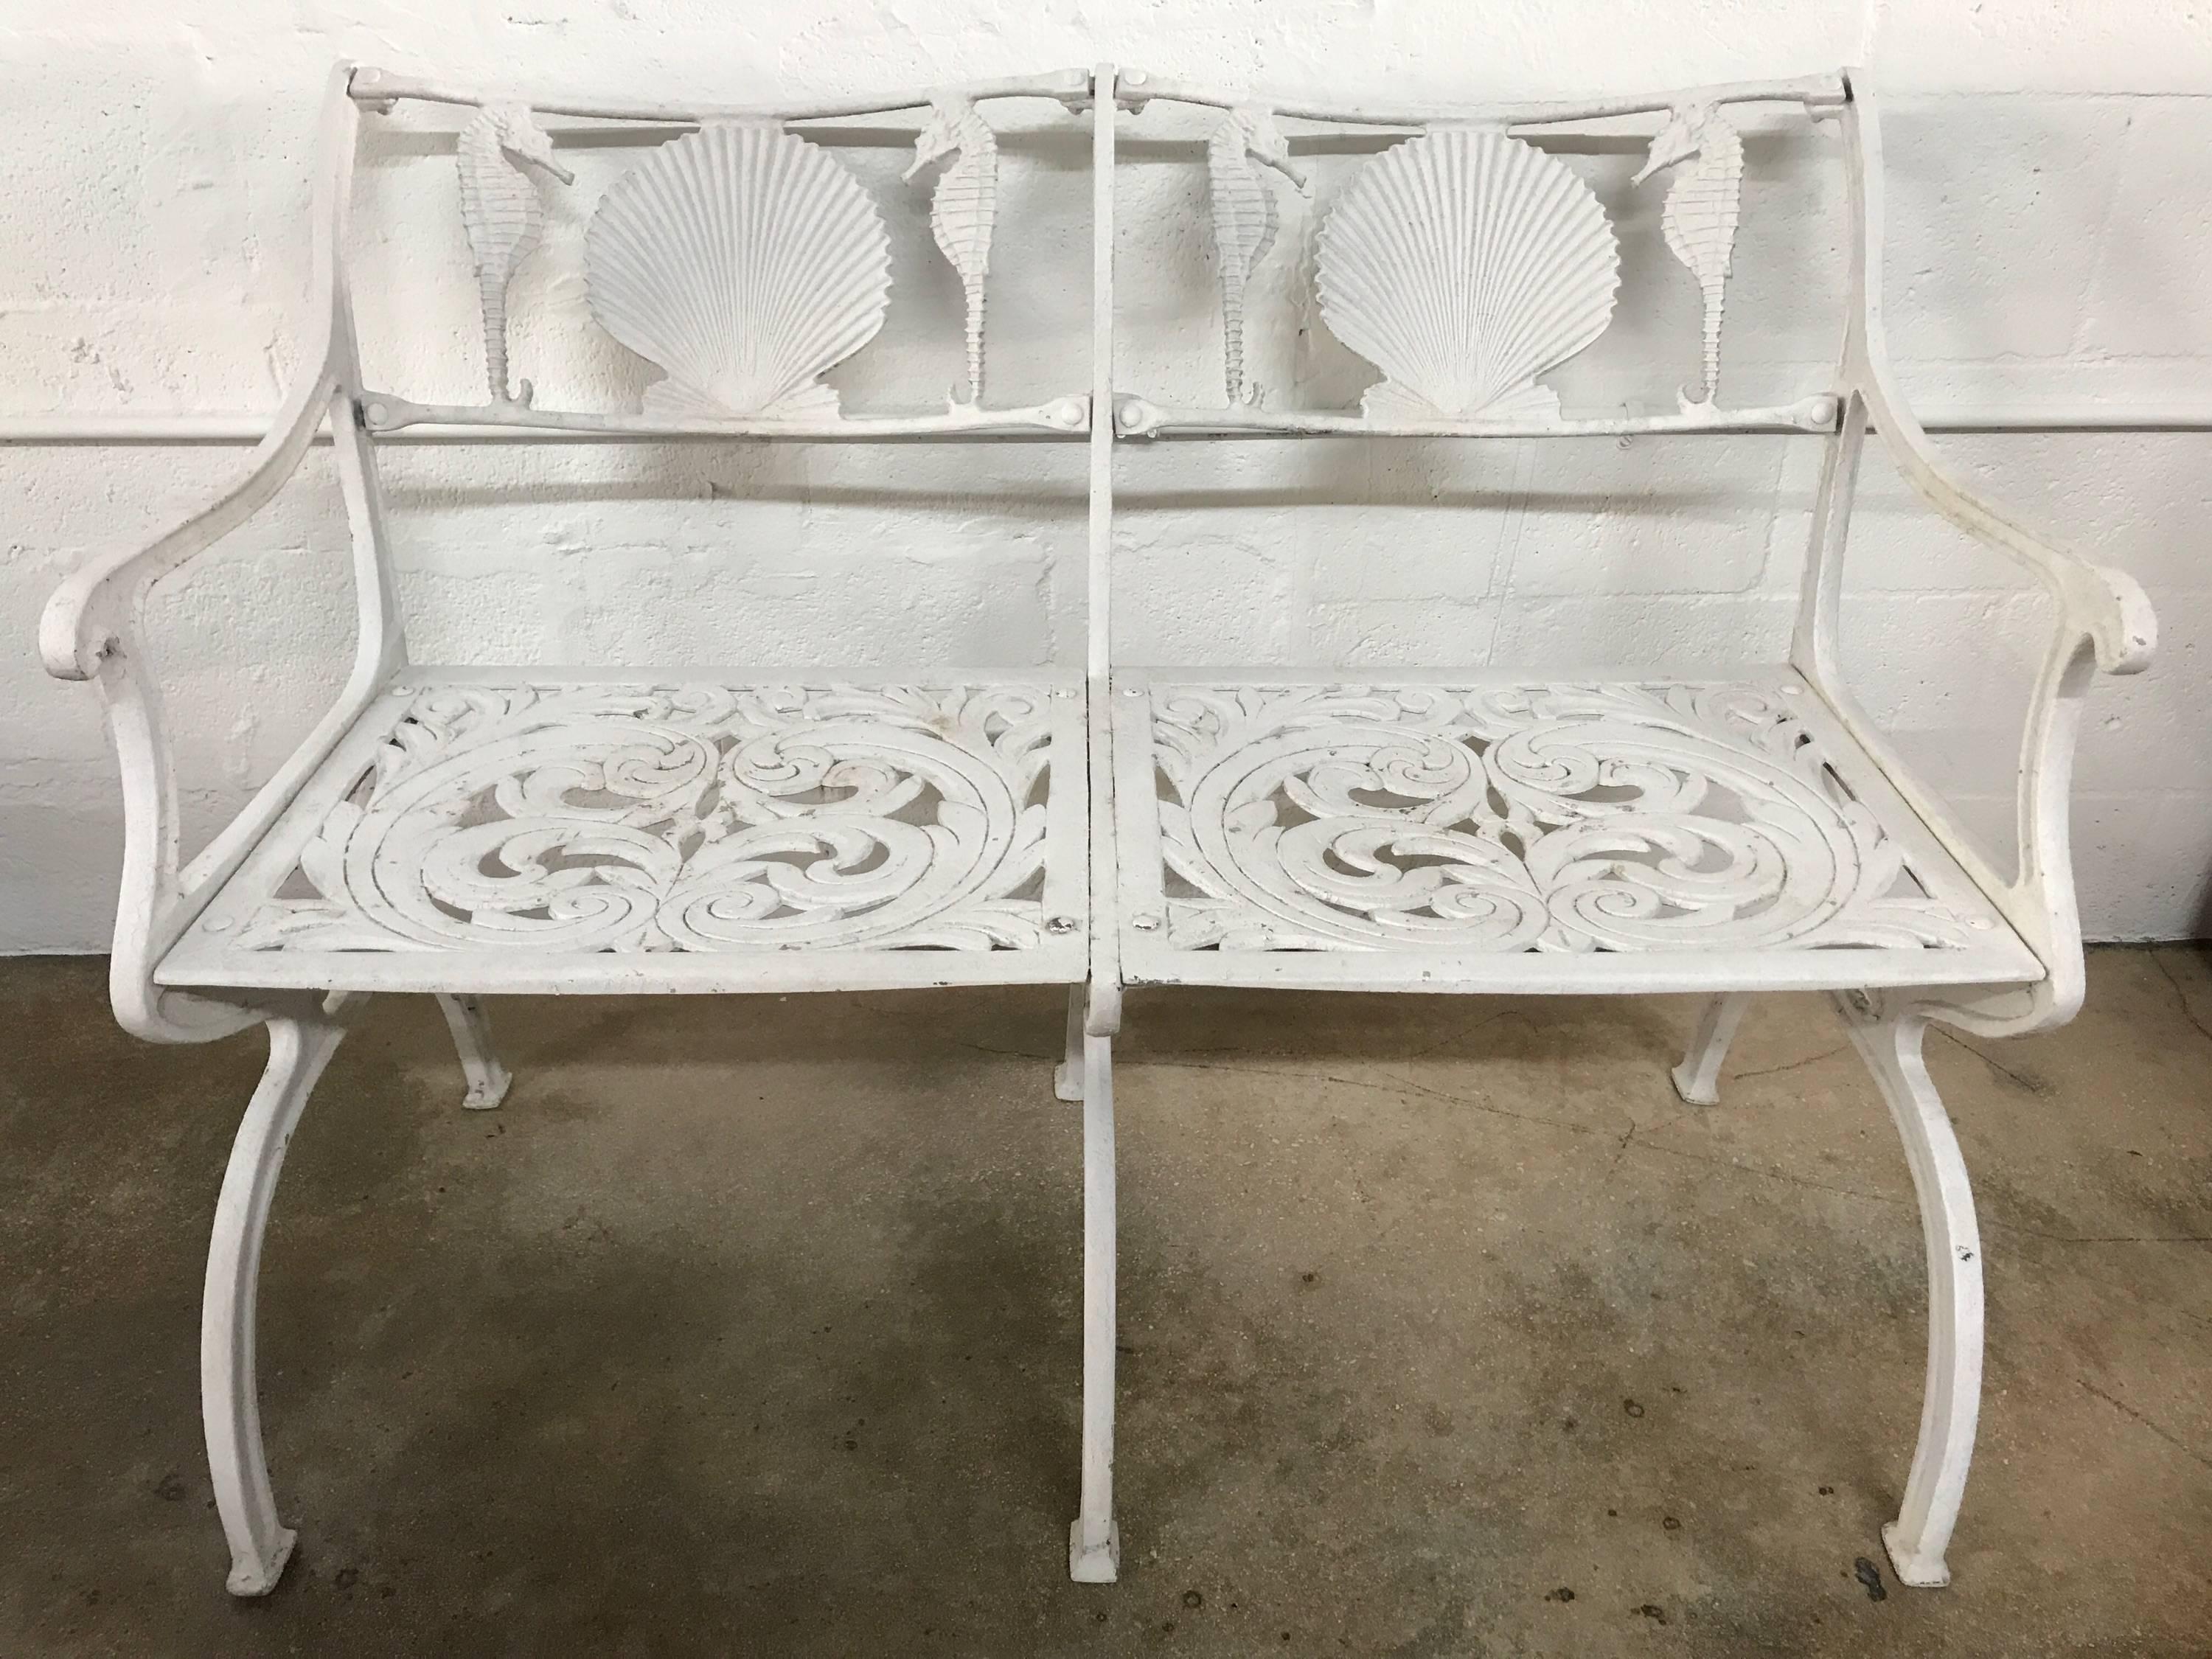 Original suite of shell and seahorse motif patio furniture from Molla including a bench, settee and single chair. This 1940s set was an early production with thinner lines than the common cast pieces of the 1950s

Dimensions of chair:
31.5